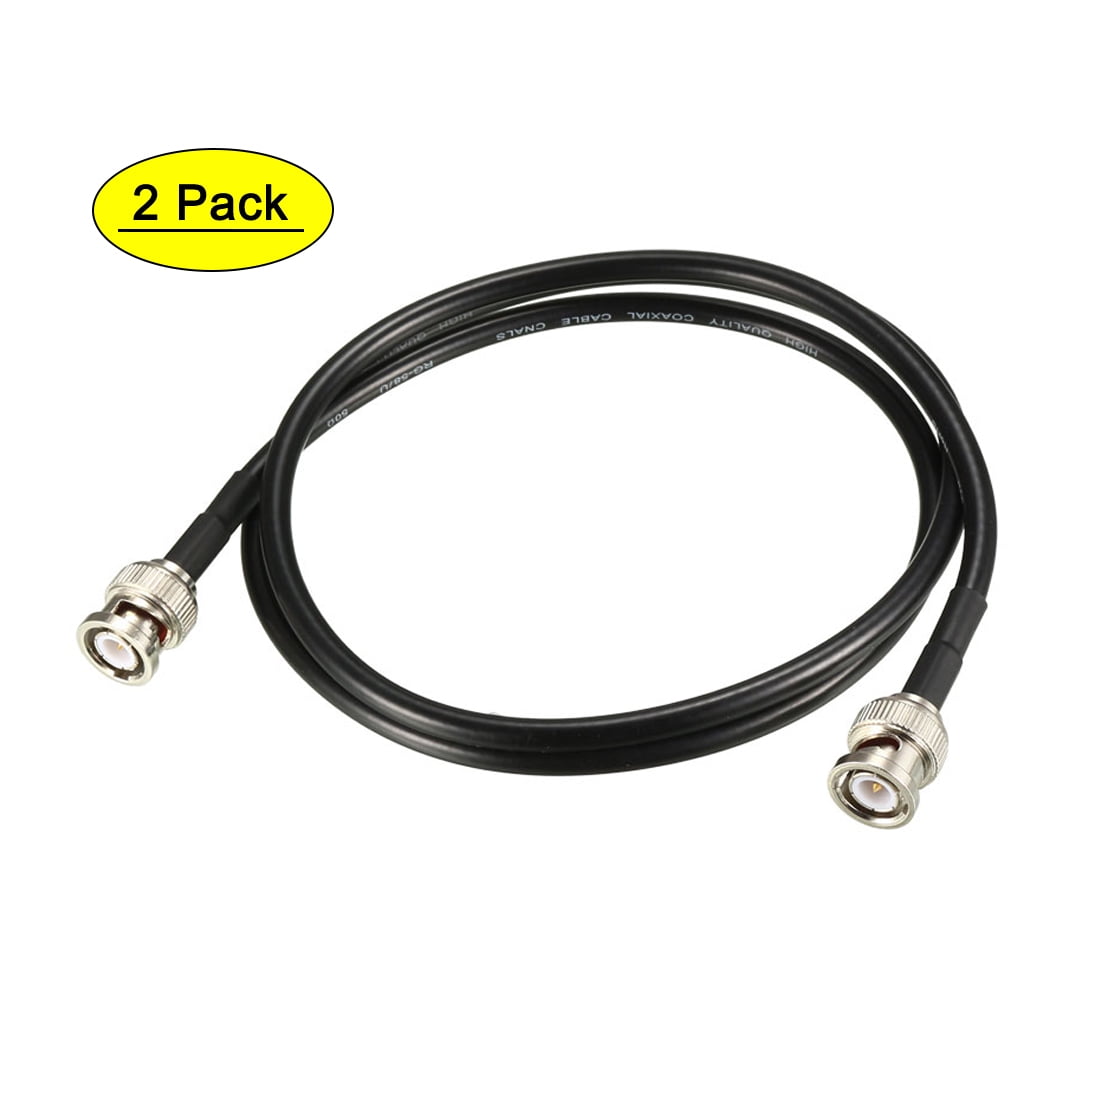 UHF So239 Female to SMA Male Straight Crimp Rg58 Cable Jumper Pigtail 1m for sale online 